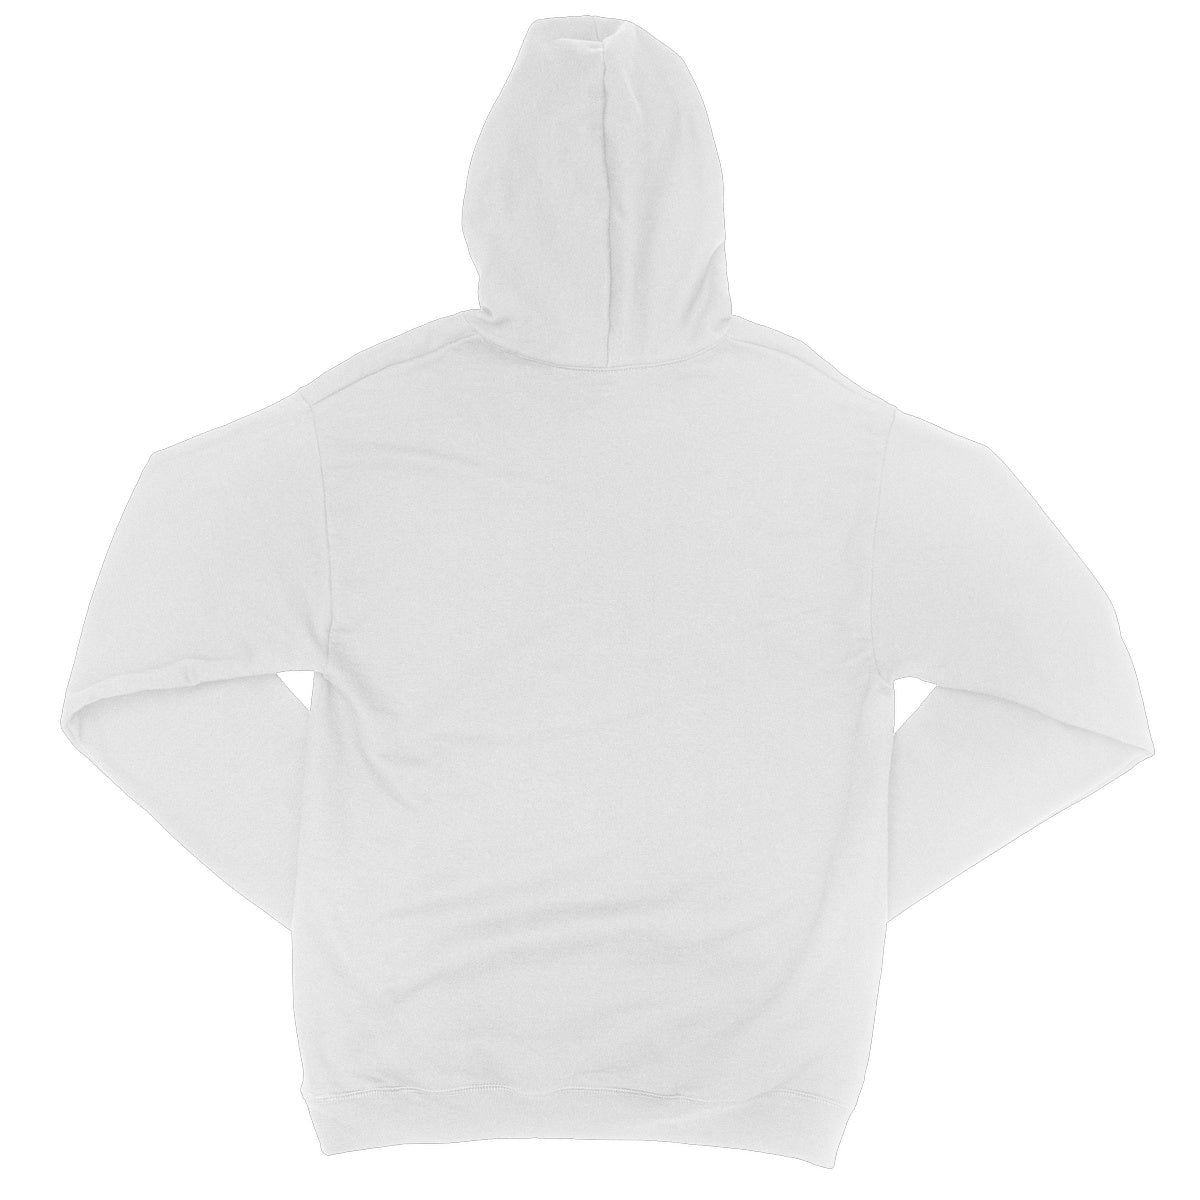 Projectivized Nodal Cubic College Hoodie